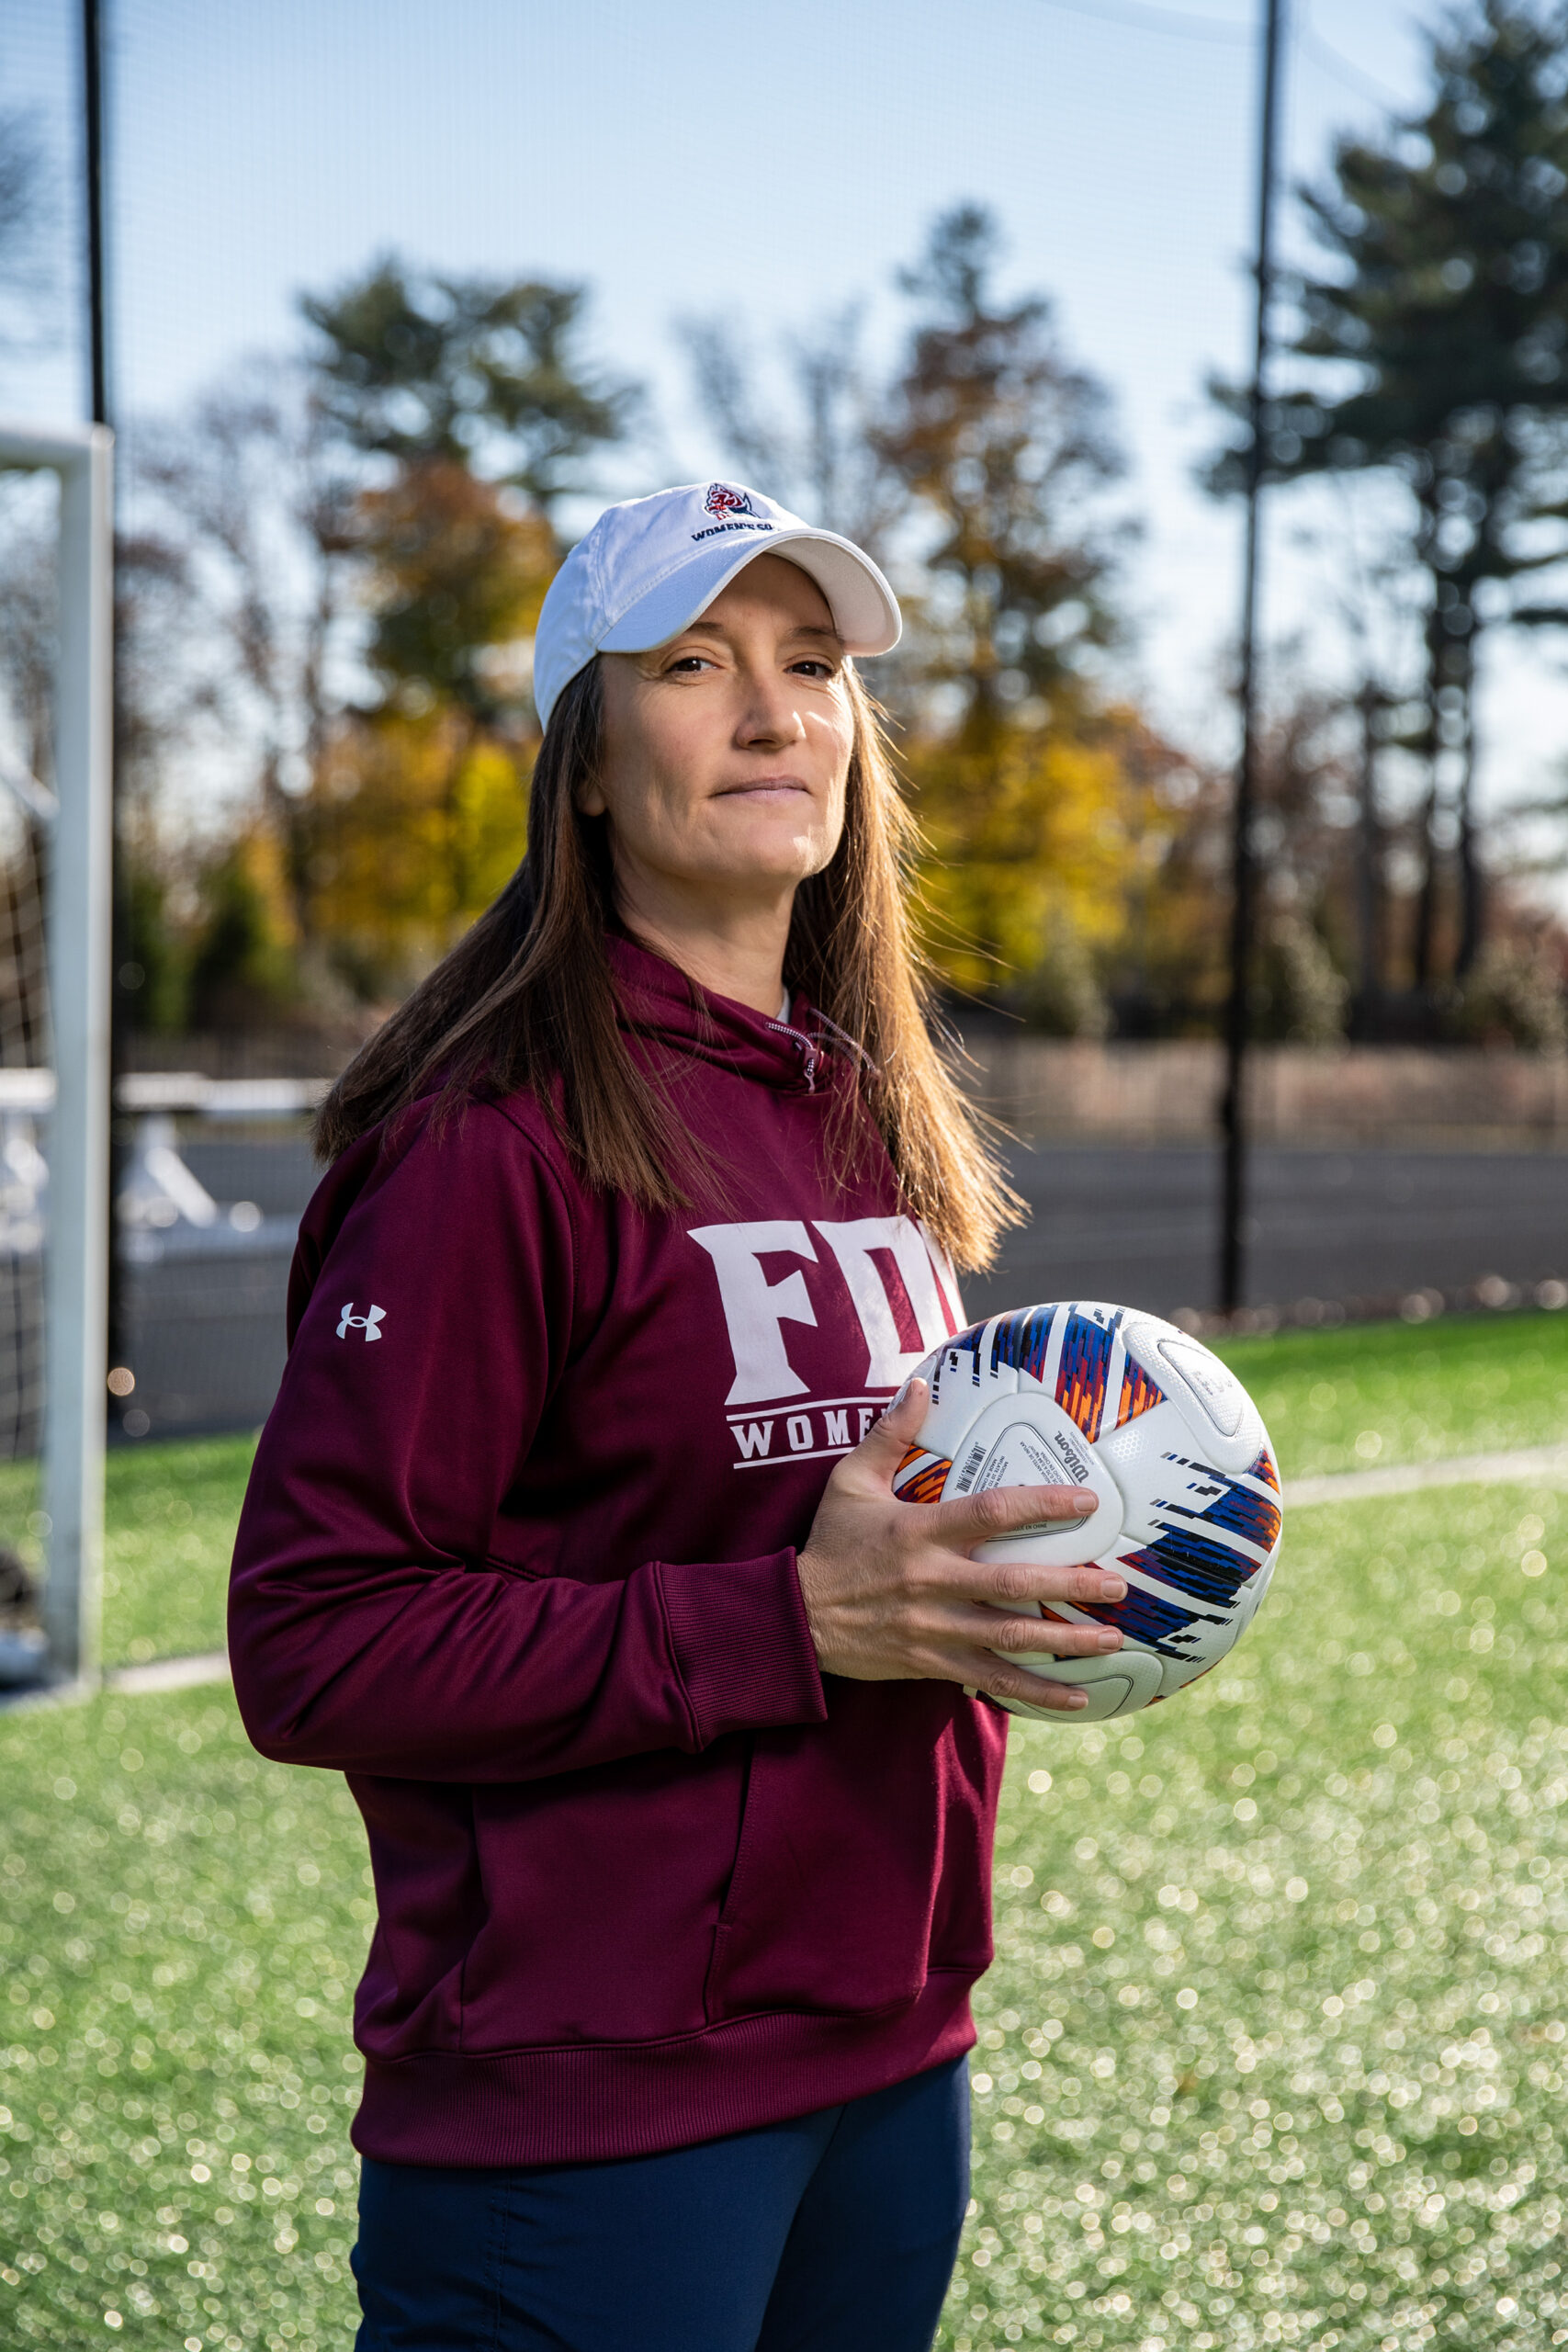 A woman in a white baseball cap and a burgundy shirt stands on a soccer field holding a soccer ball. 